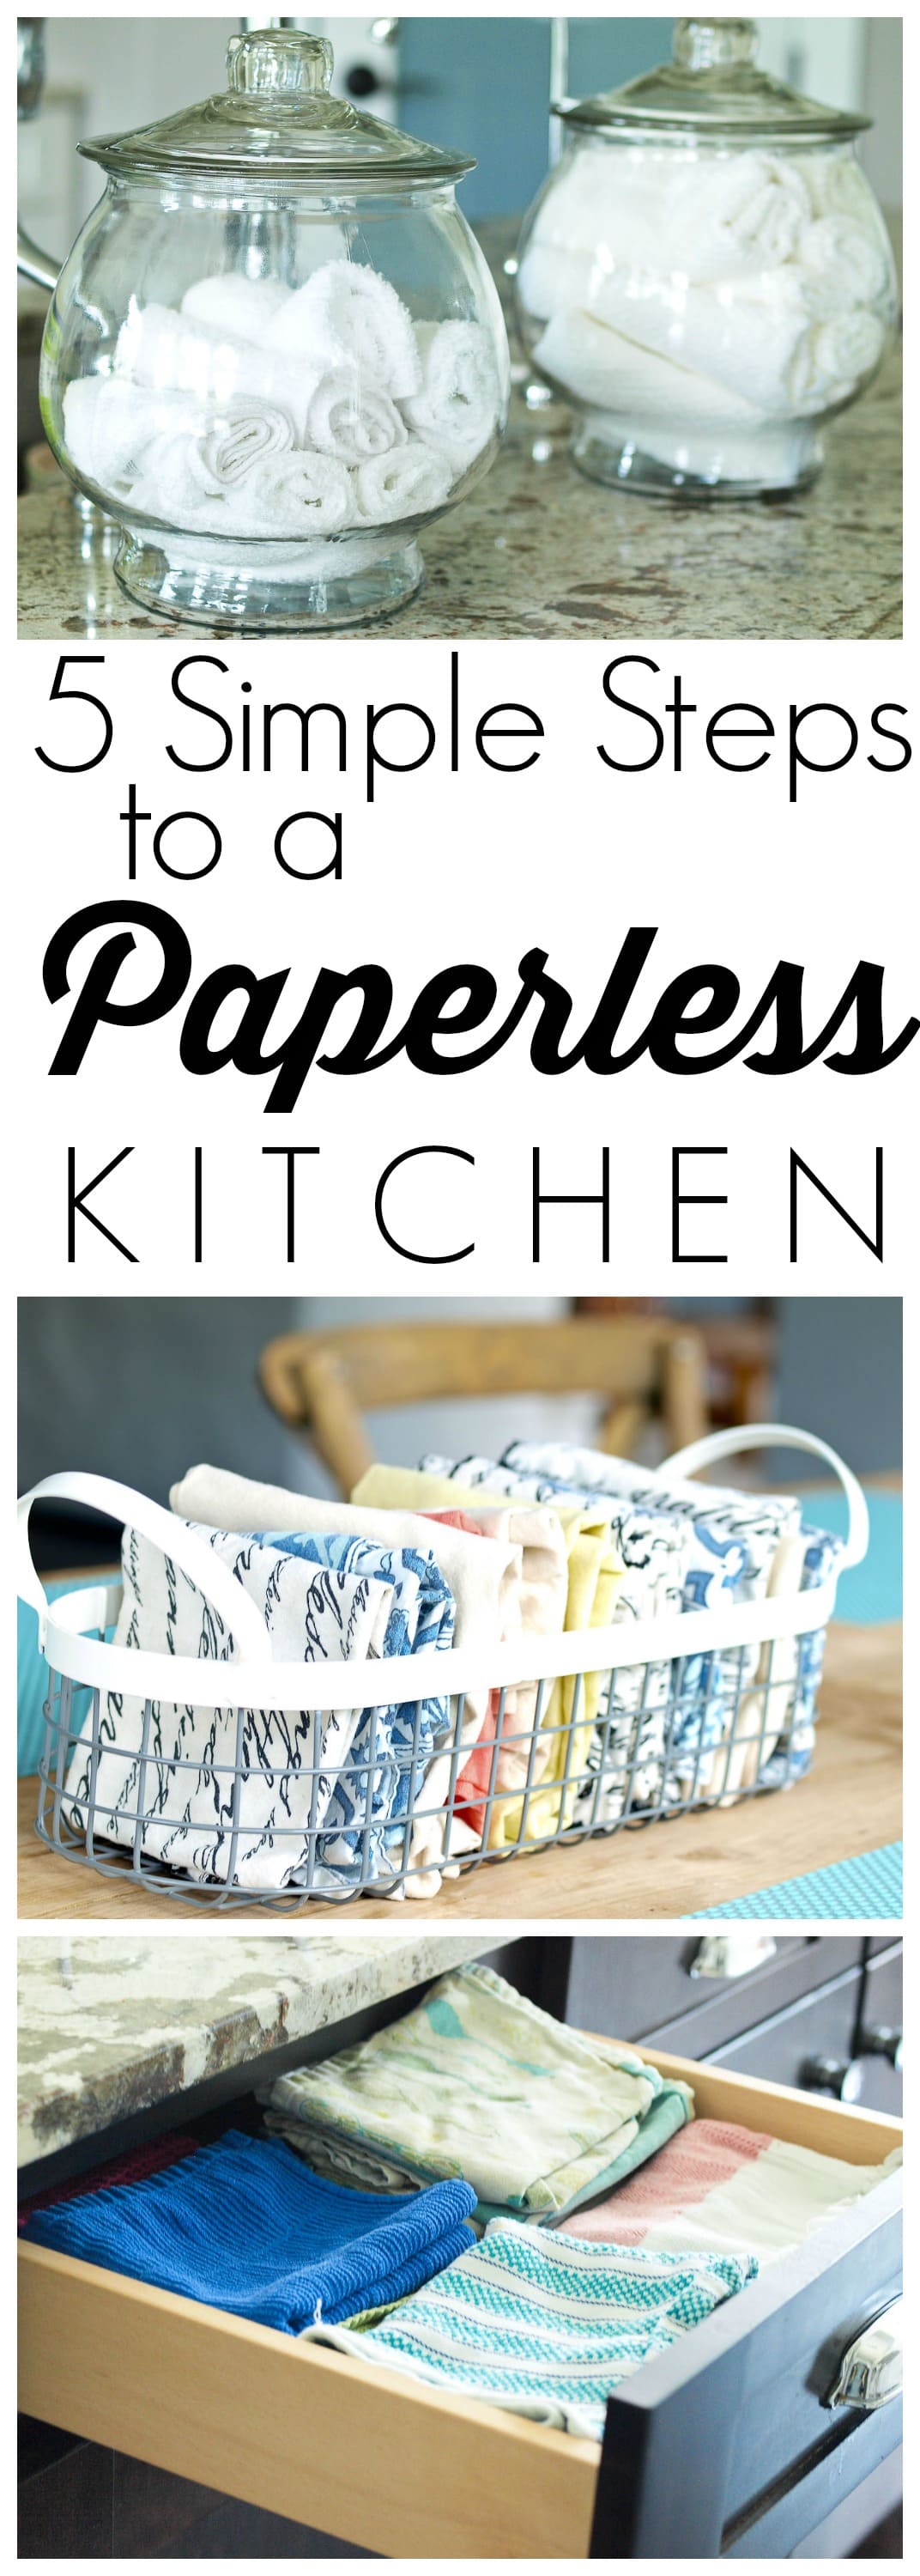 5 Simple Tips for Going Paperless in your Kitchen.  It's much easier and more convenient than you think!